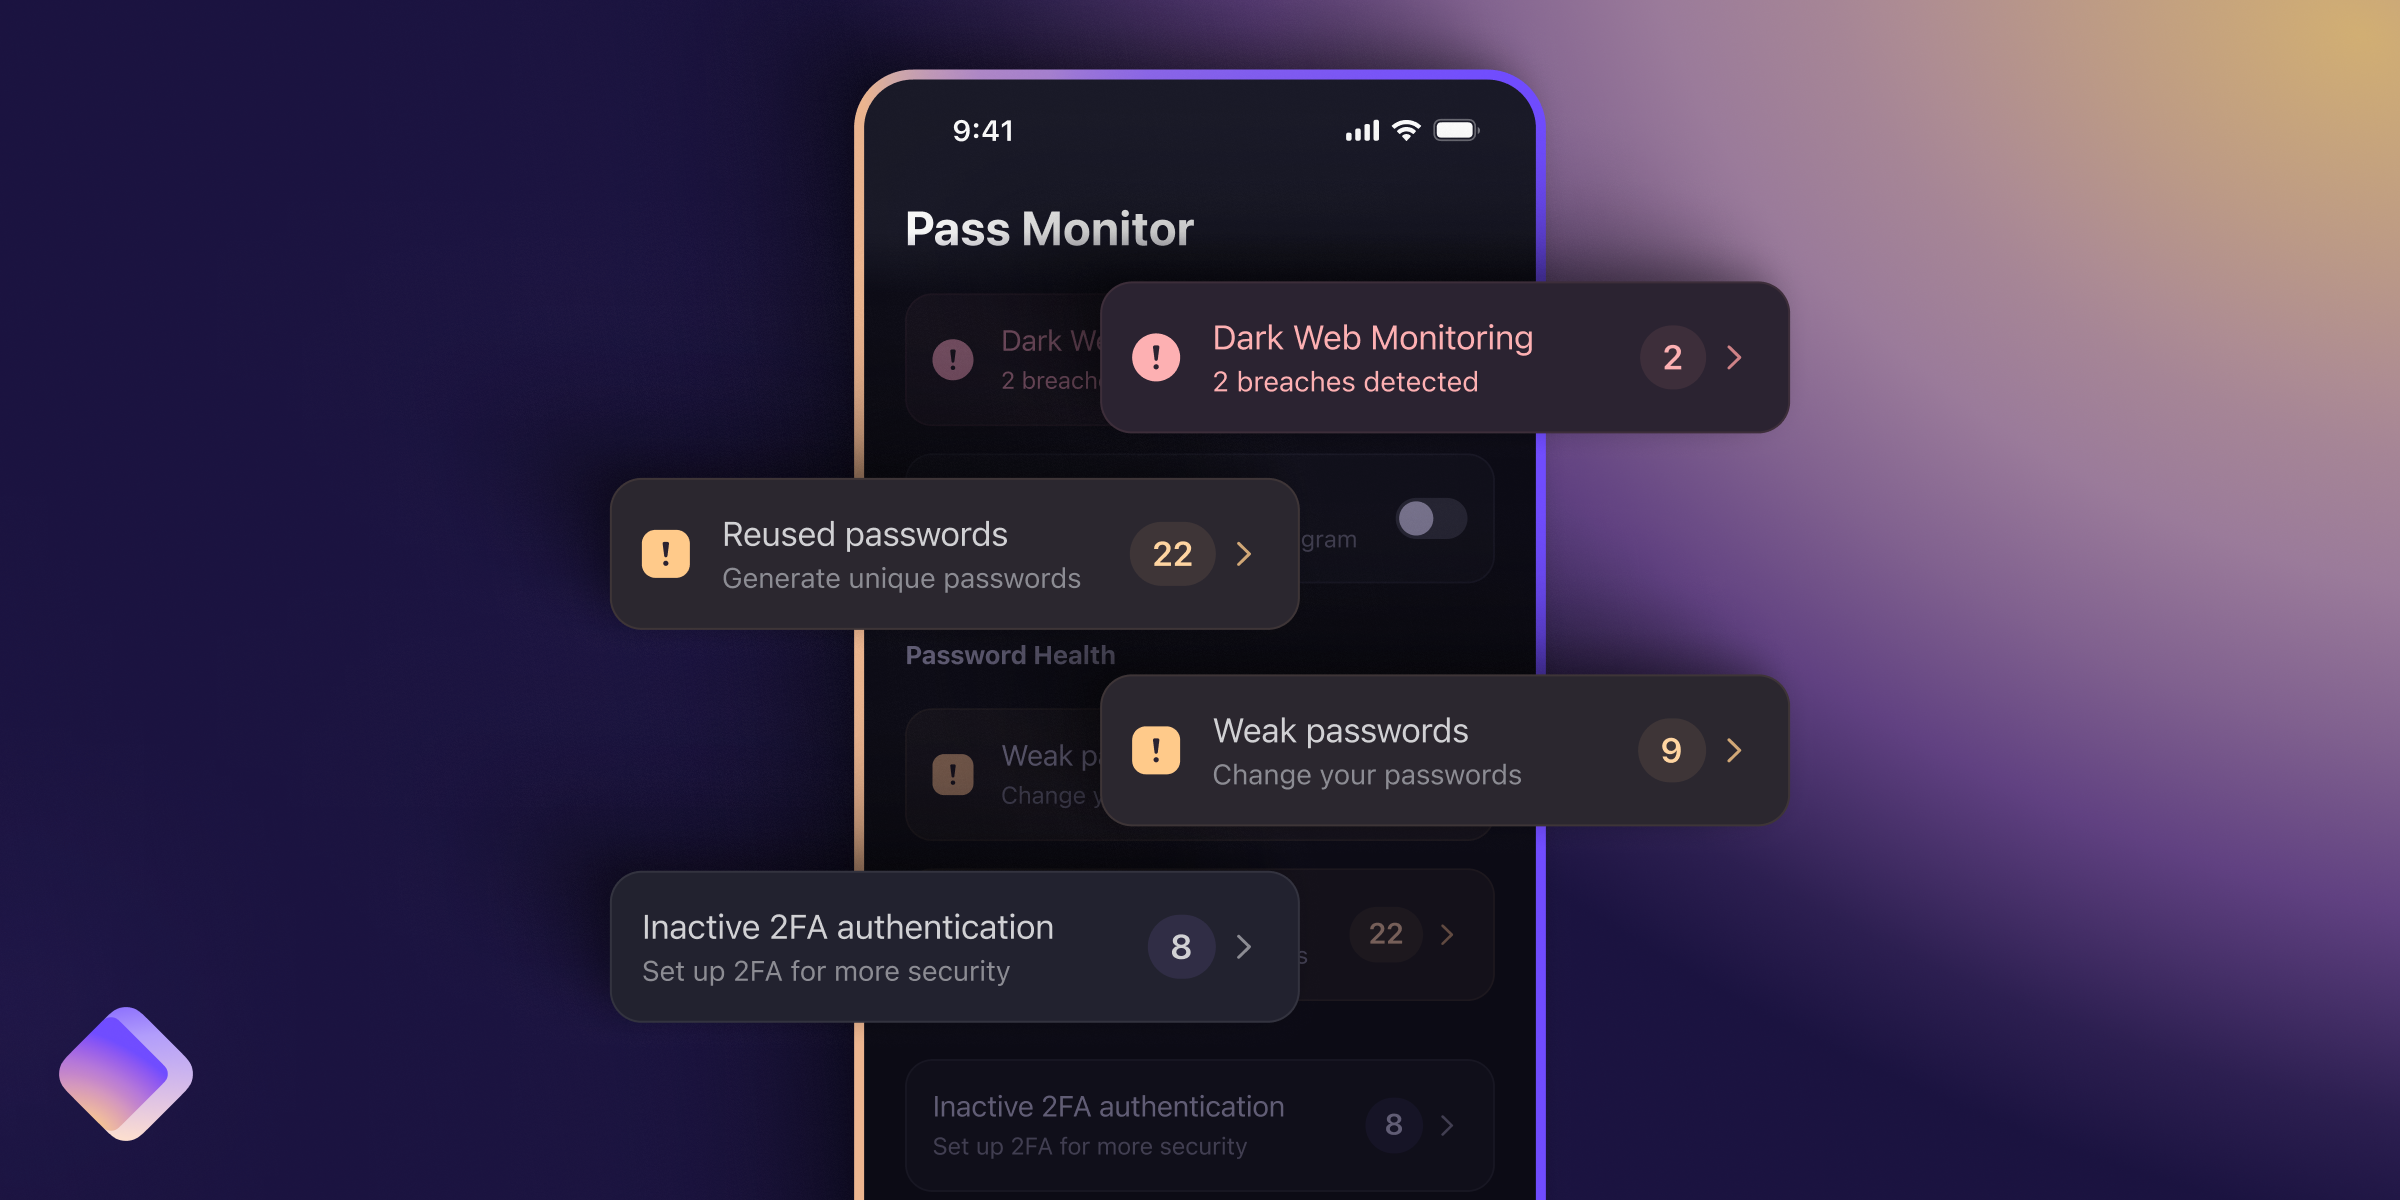 An illustration of Dark Web Monitoring and Weak Password alerts in Proton Pass Monitor.